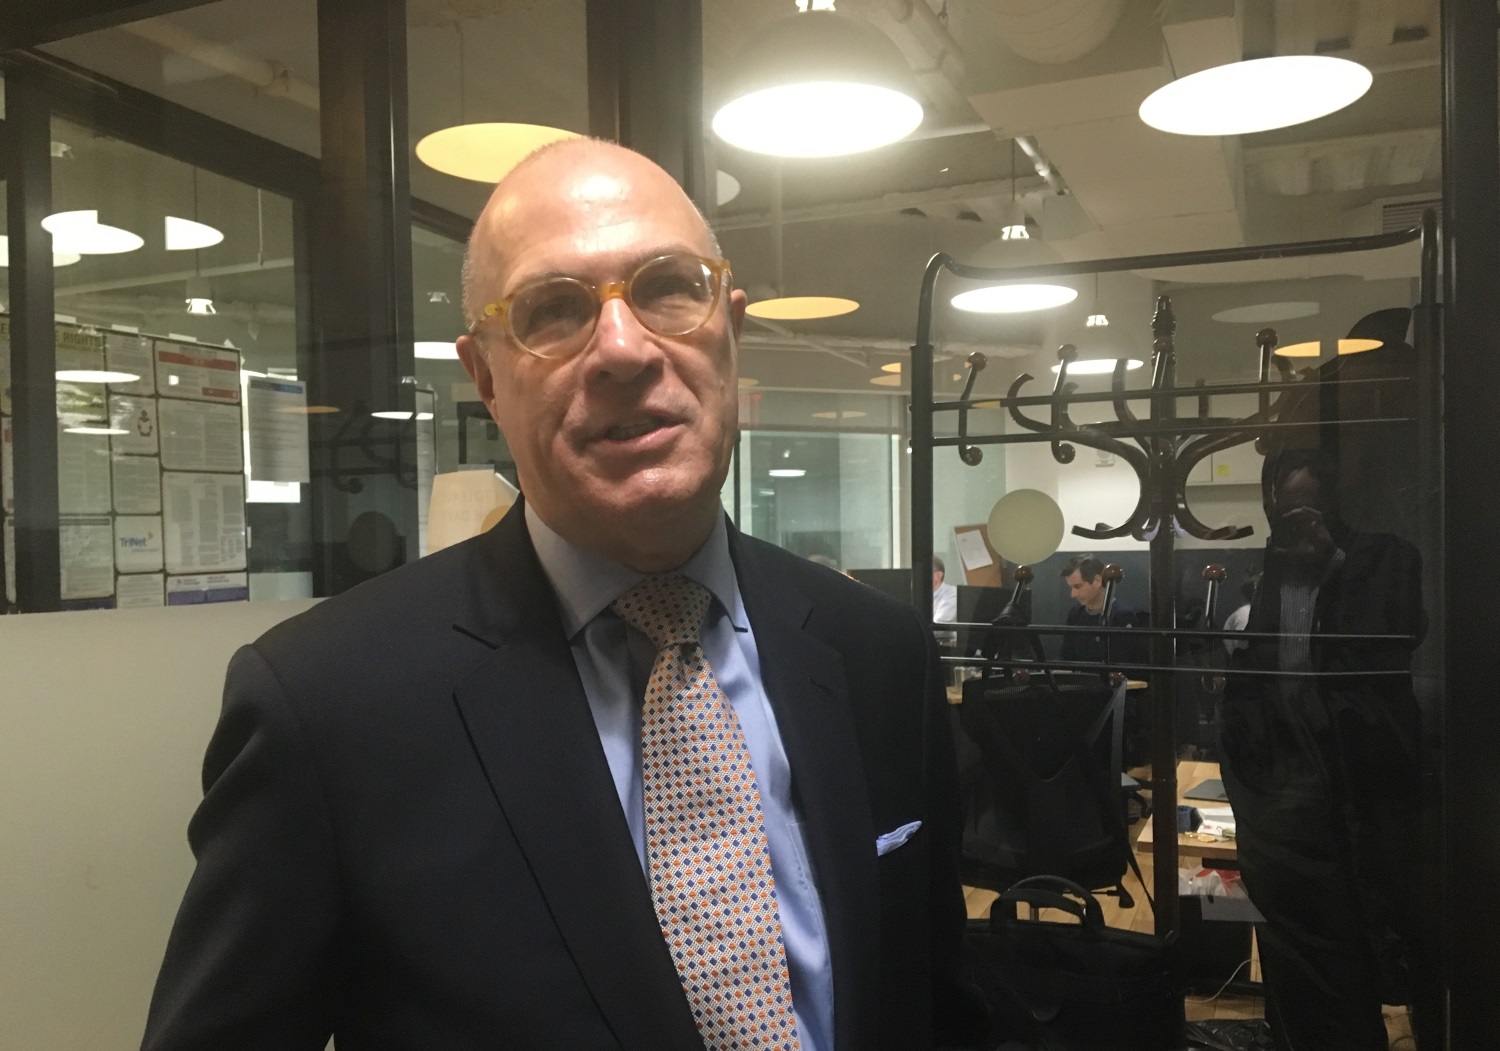 Former-cftc-chair-giancarlo-lays-out-why-he-thinks-xrp-isn’t-a-security